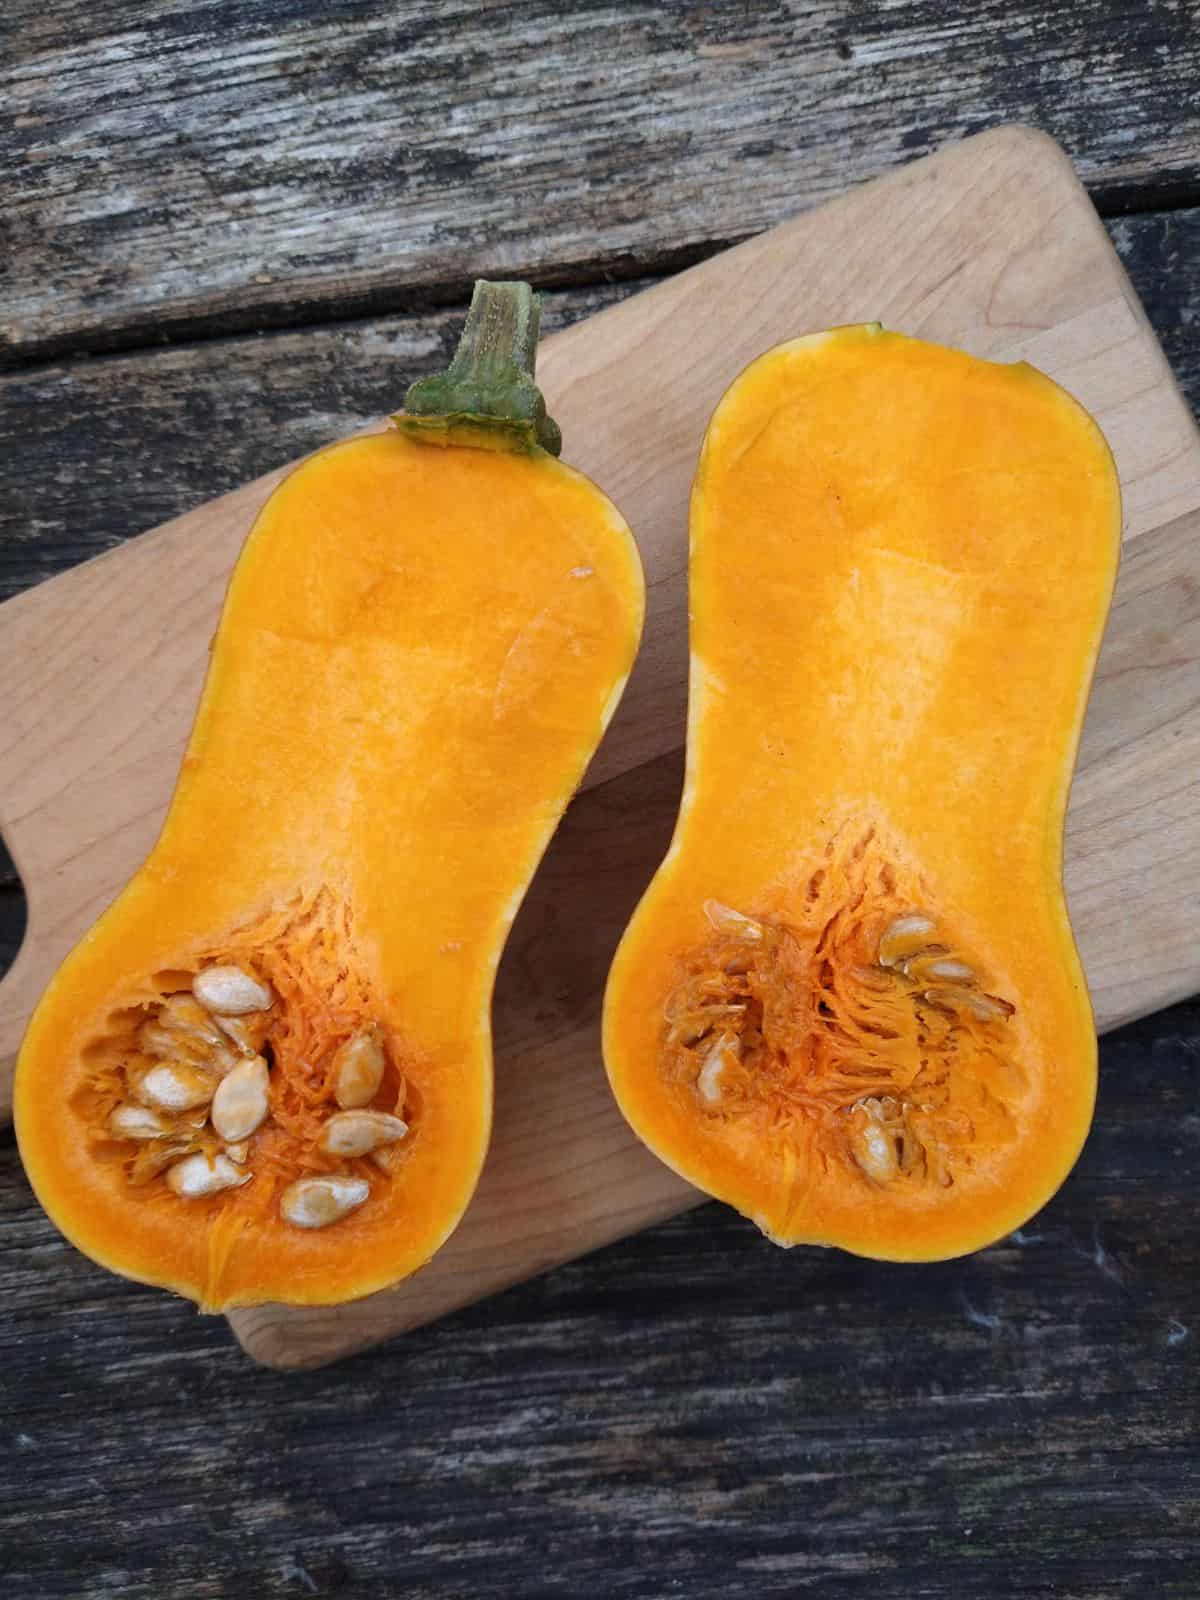 A Honeynut squash that has been cut in half. It's sitting on a cutting board with the seeds still inside.